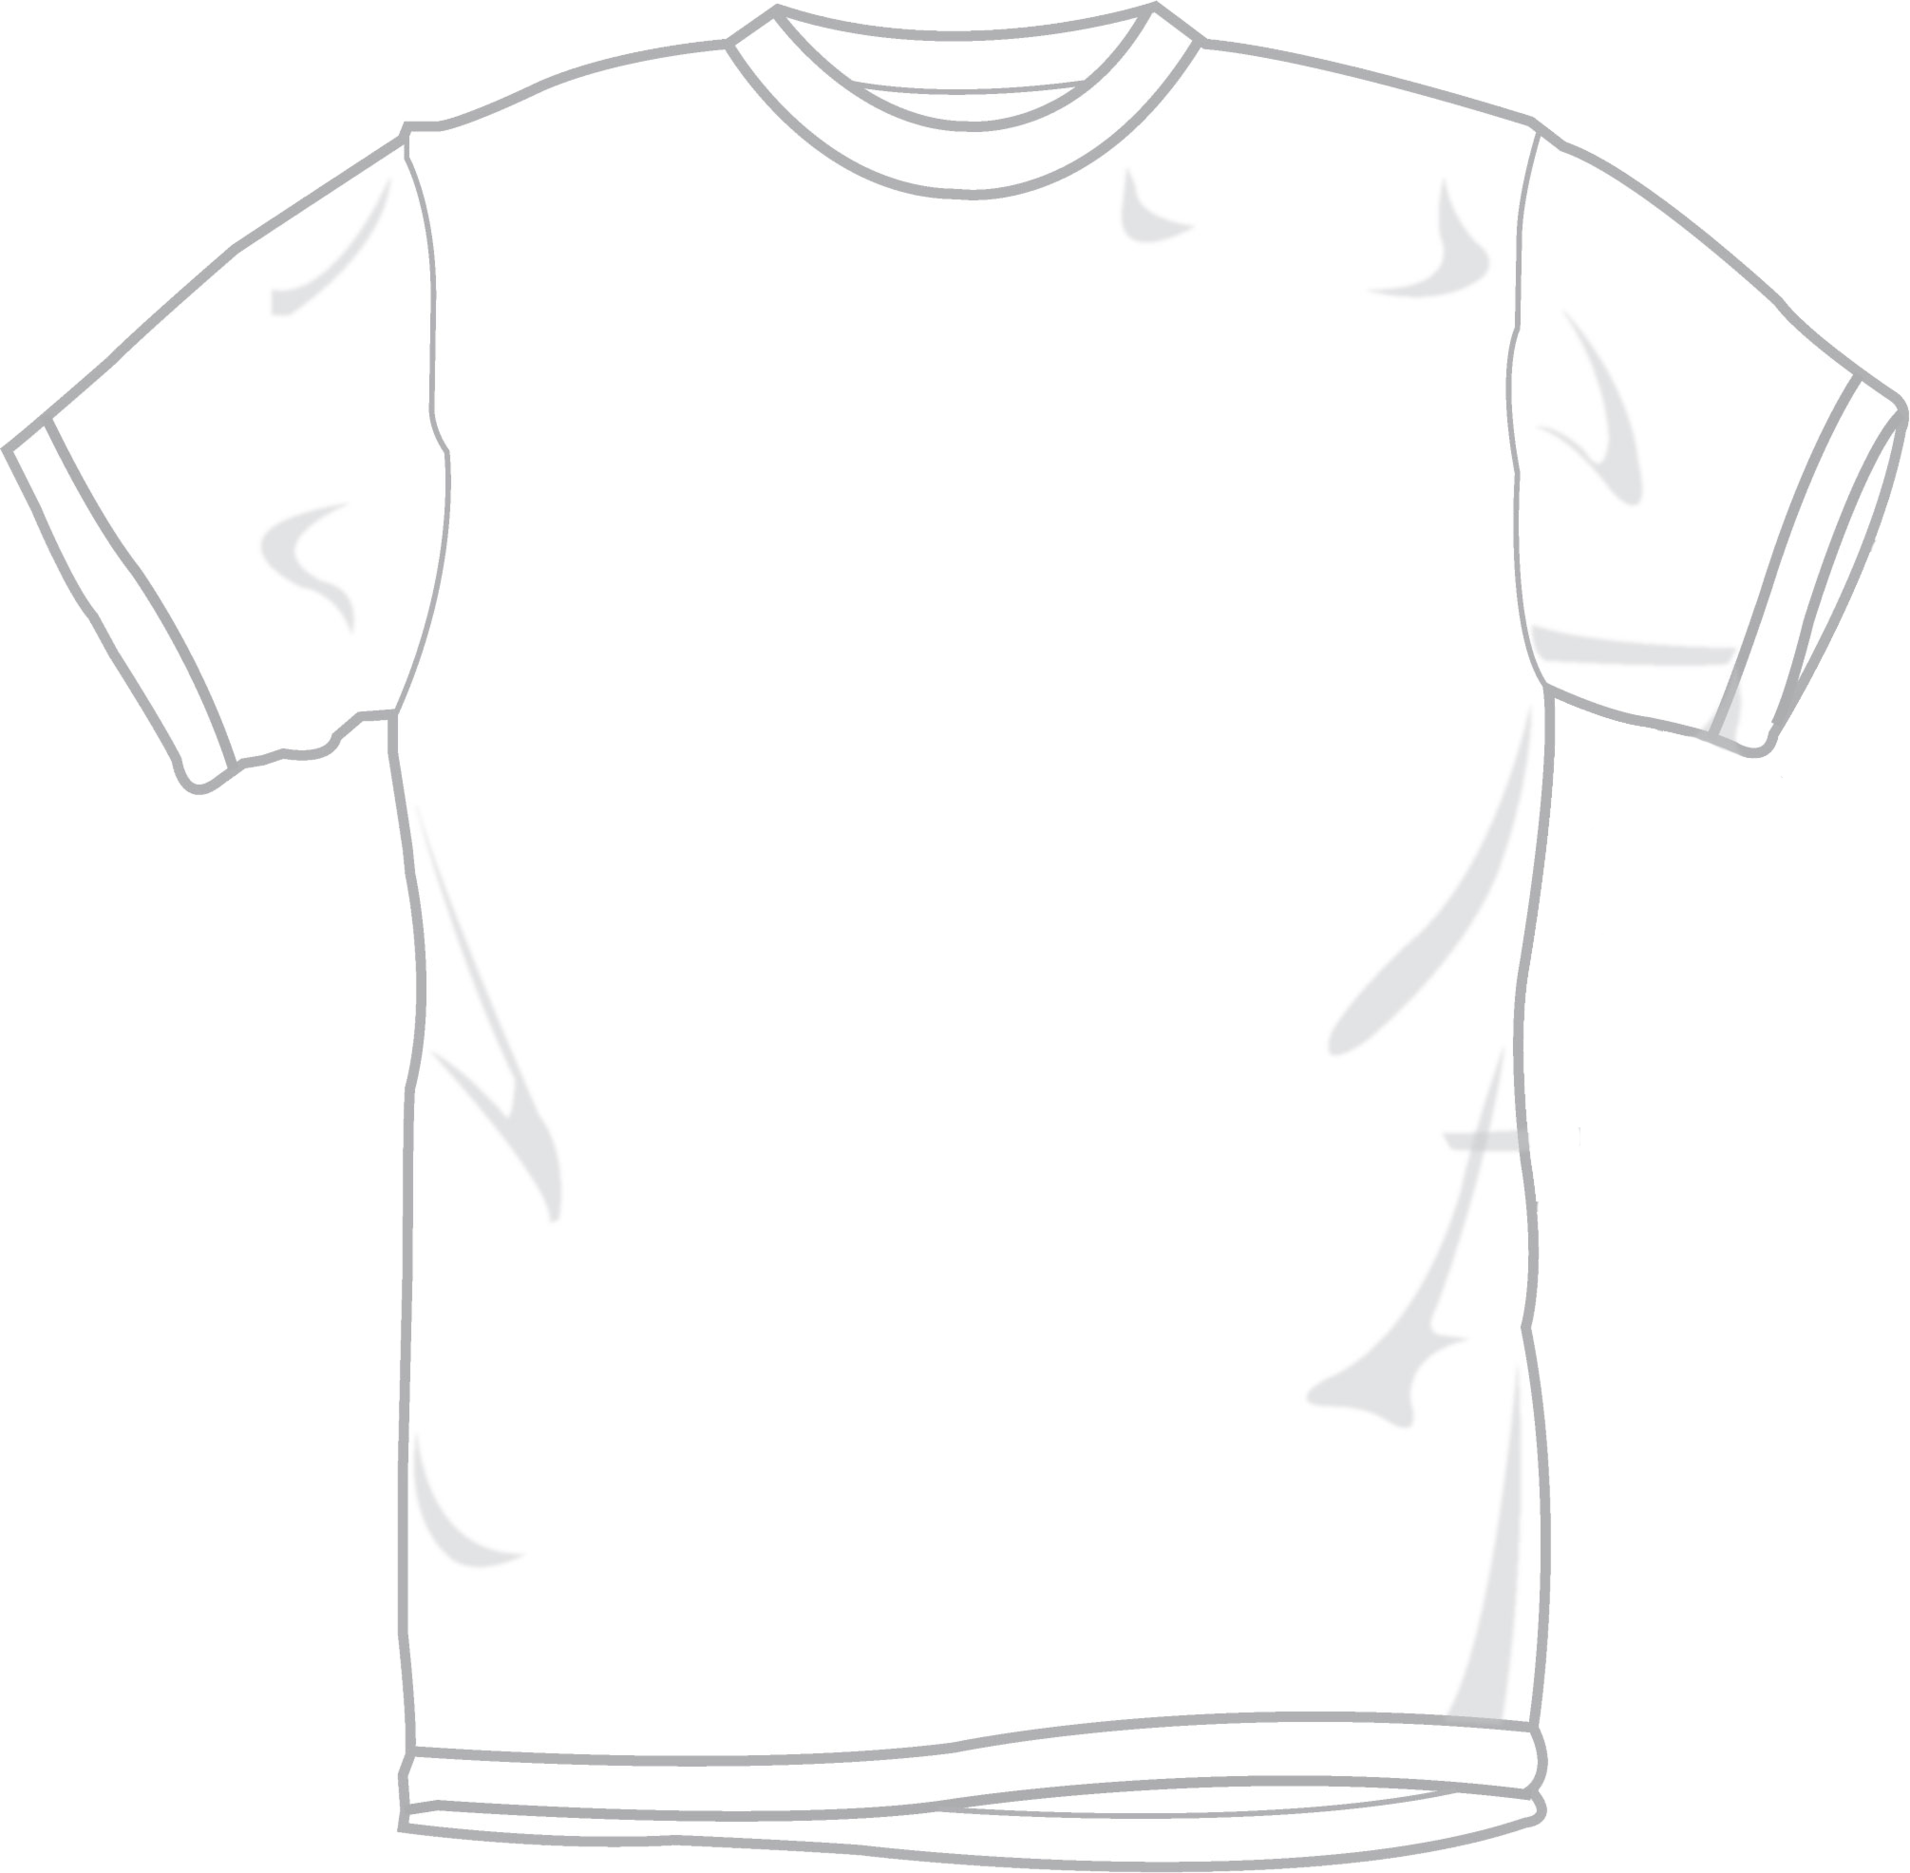 A White T-shirt With A Black Background